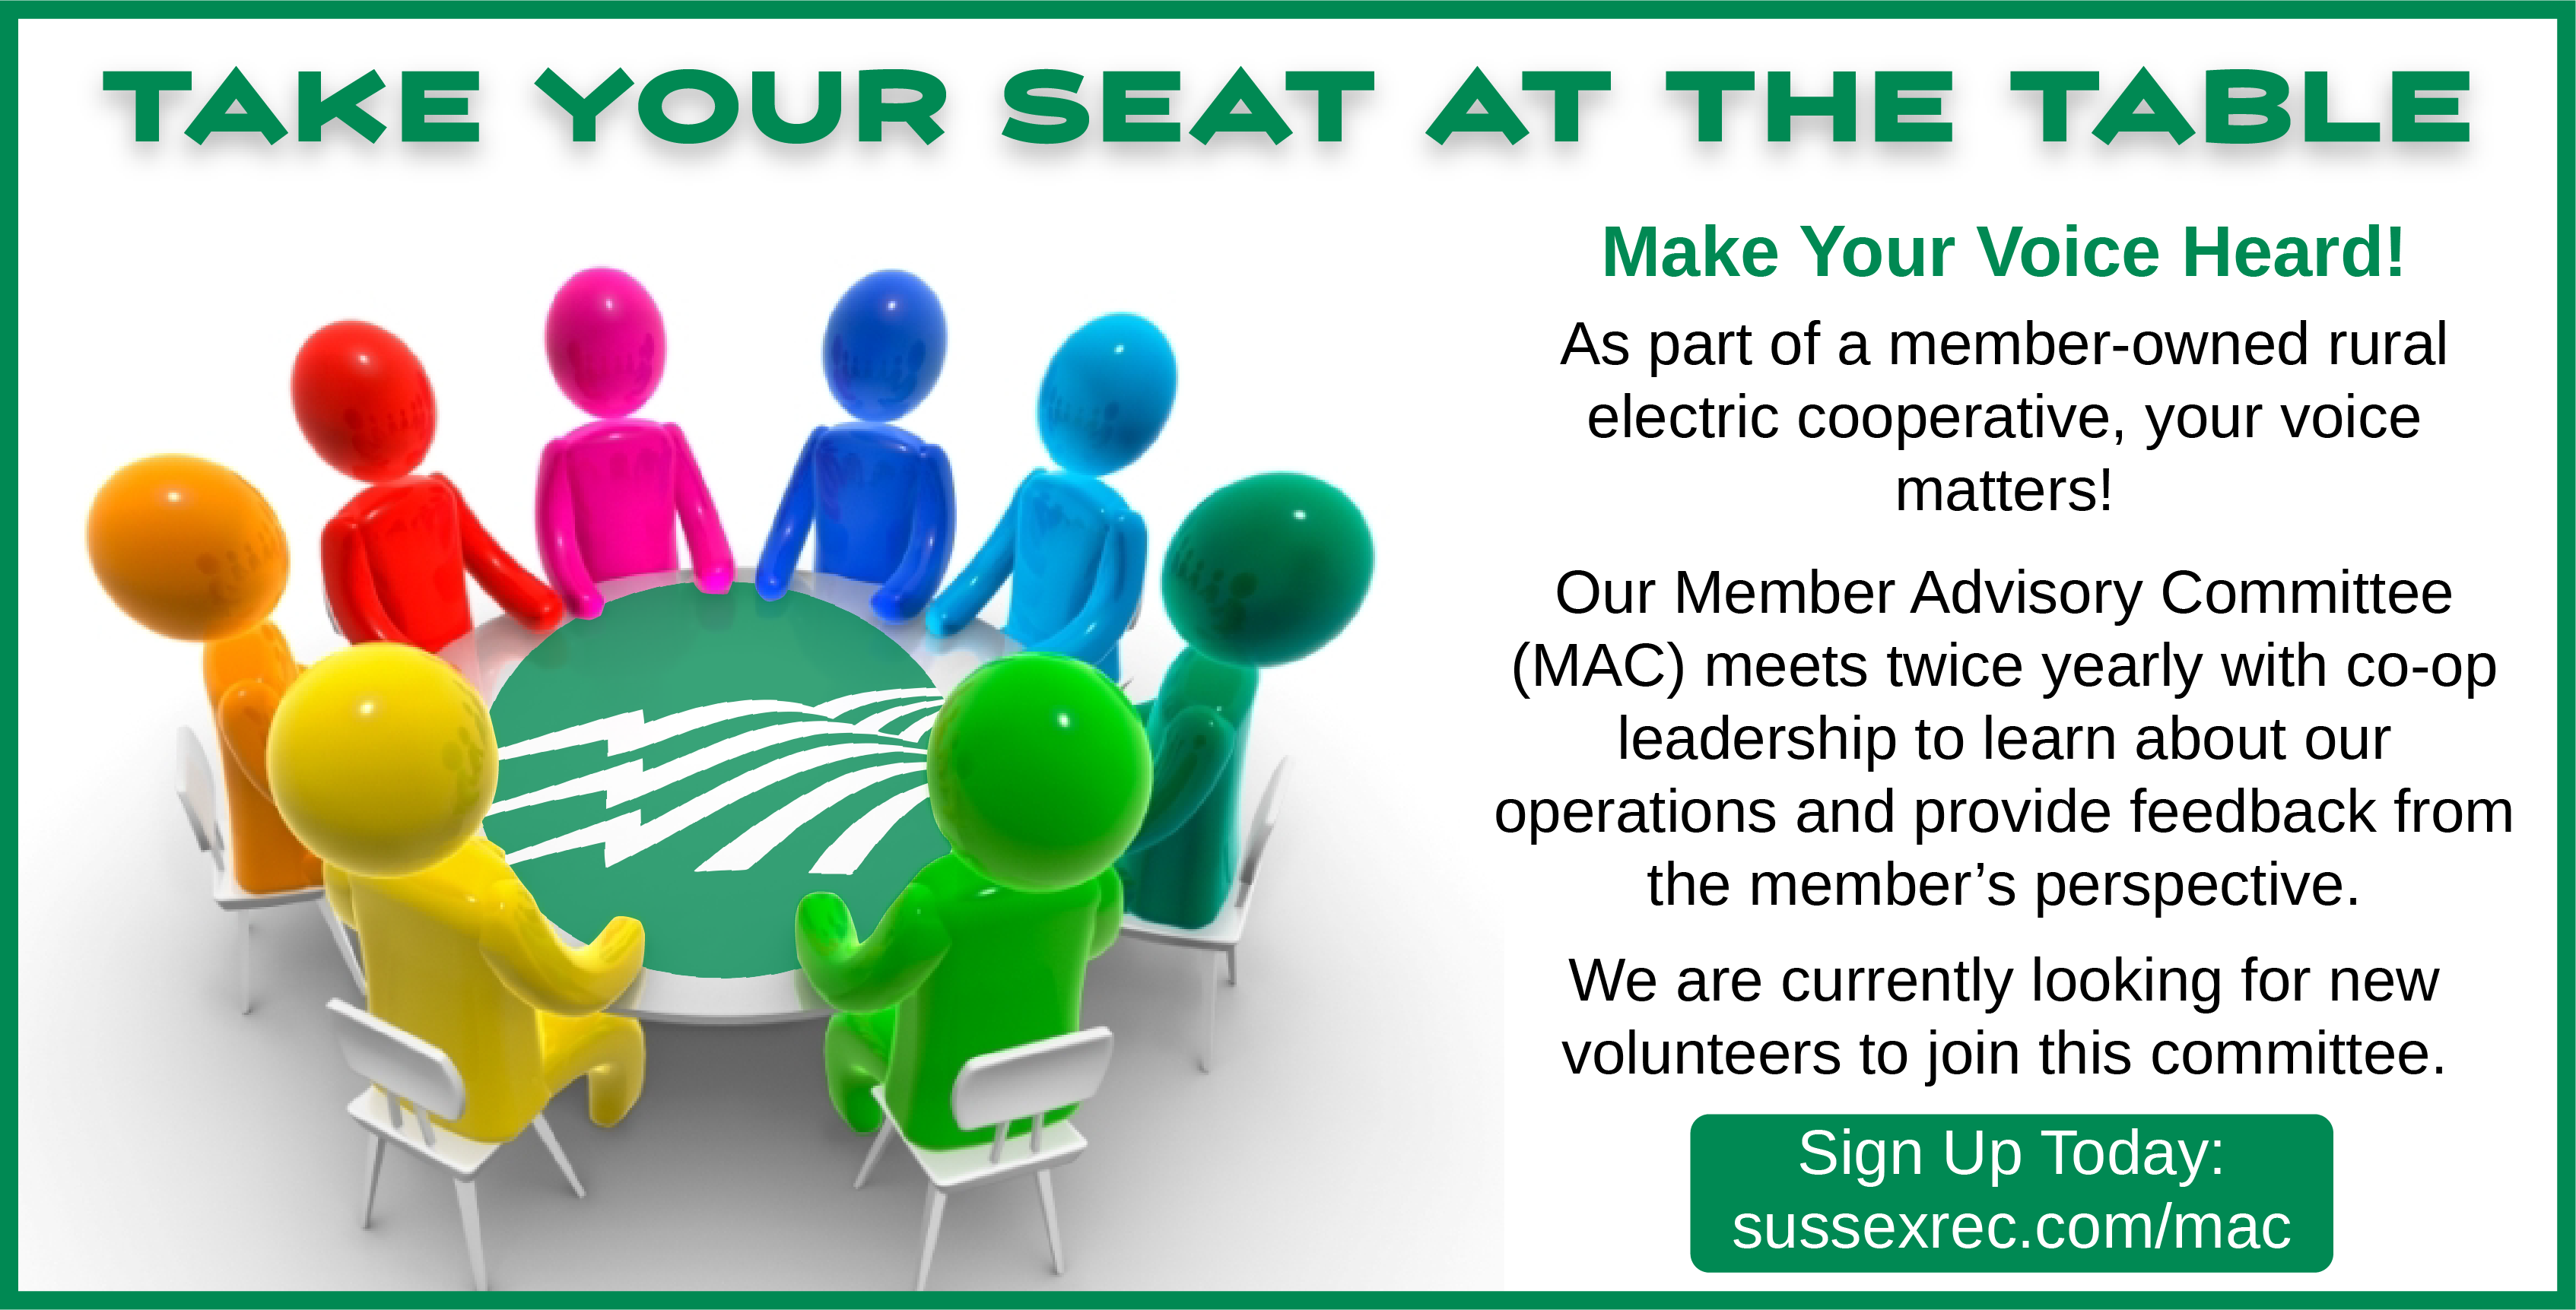 TAKE YOUR SEAT AT THE TABLE. Make Your Voice Heard! As part of a member-owned rural electric cooperative, your voice matters! Our Member Advisory Committee (MAC) meets twice yearly with co-op leadership to learn about our operations and provide feedback from the member's perspective. We are currently looking for new volunteers to join this committee. Sign Up Today: sussexrec.com/mac